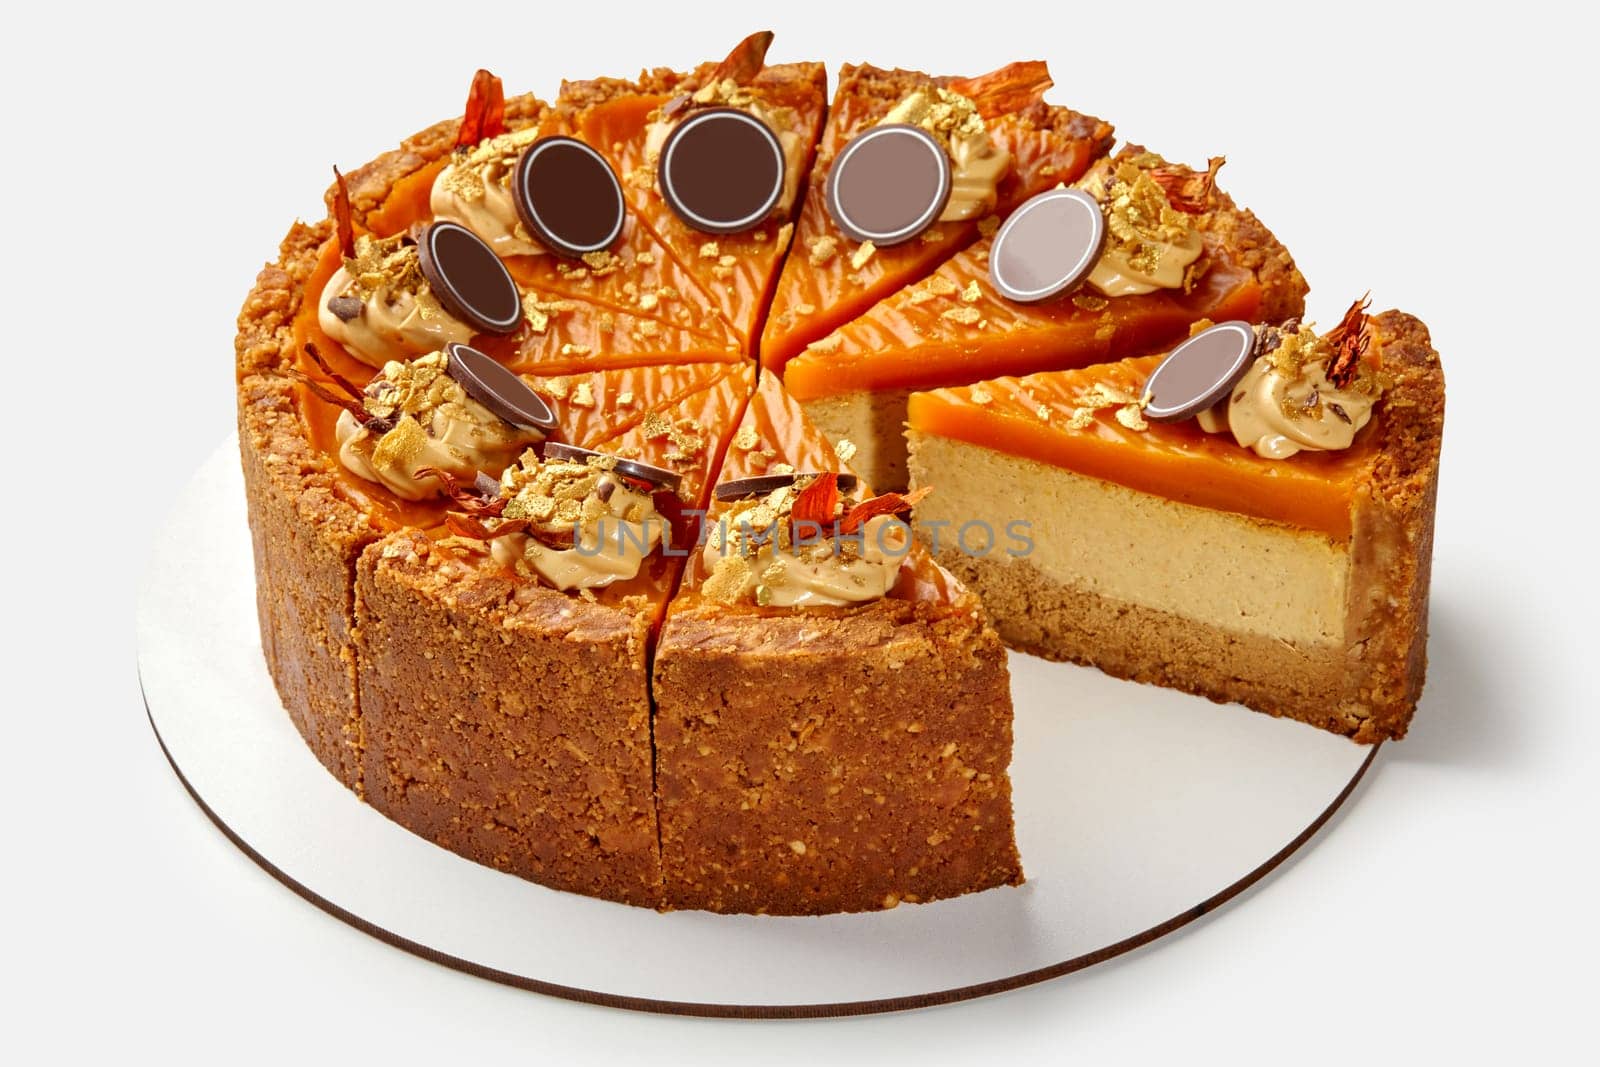 Sliced delicious cheesecake with crunchy shortcrust base topped with tender pumpkin jelly layer decorated with nut whipped cream, caramel crumbs and chocolate. Welcome fall with seasonal dessert